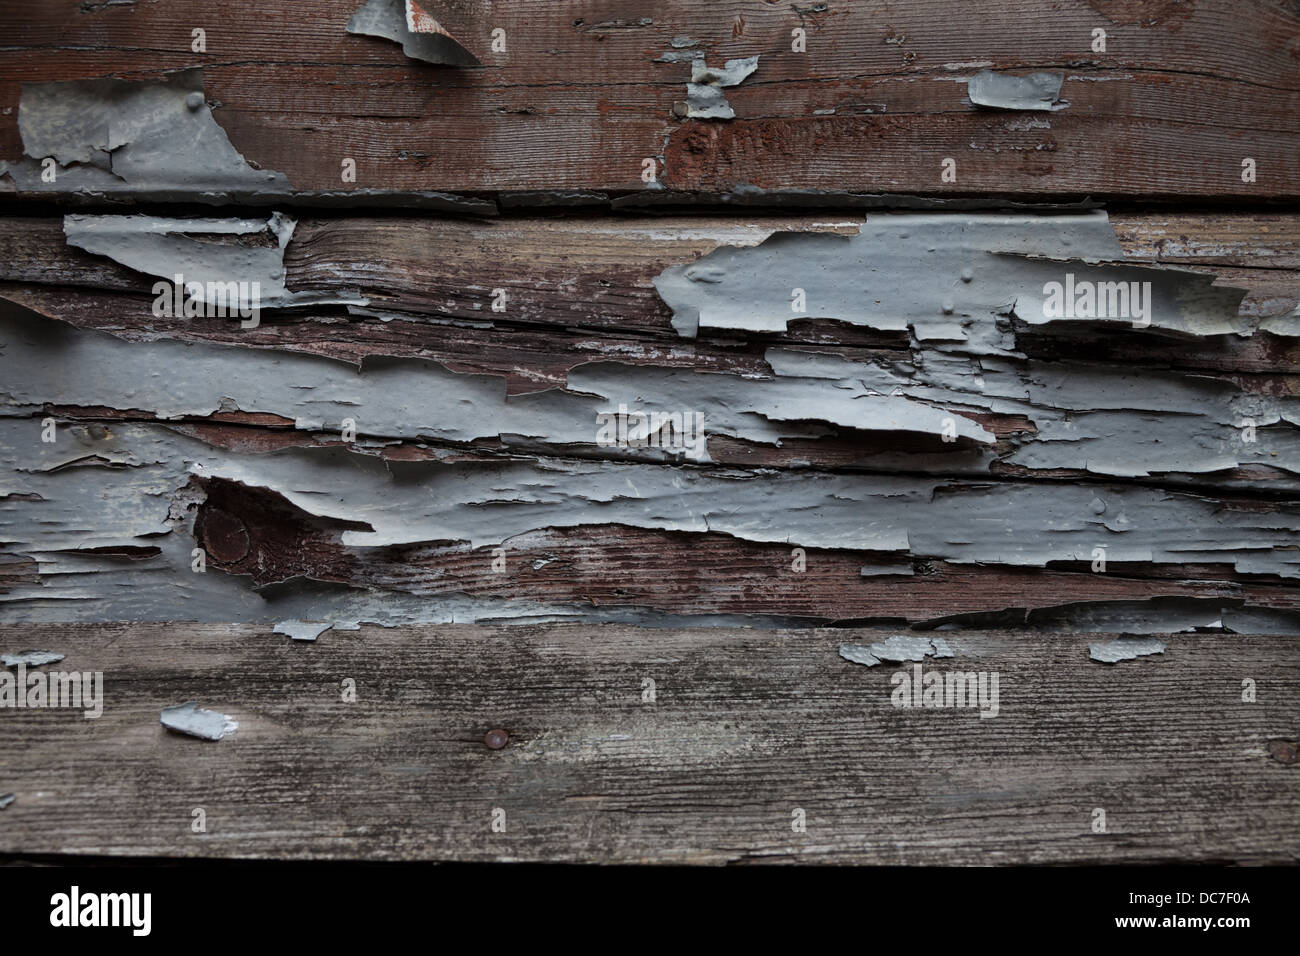 Flaking paint on rotting wooden planks Stock Photo